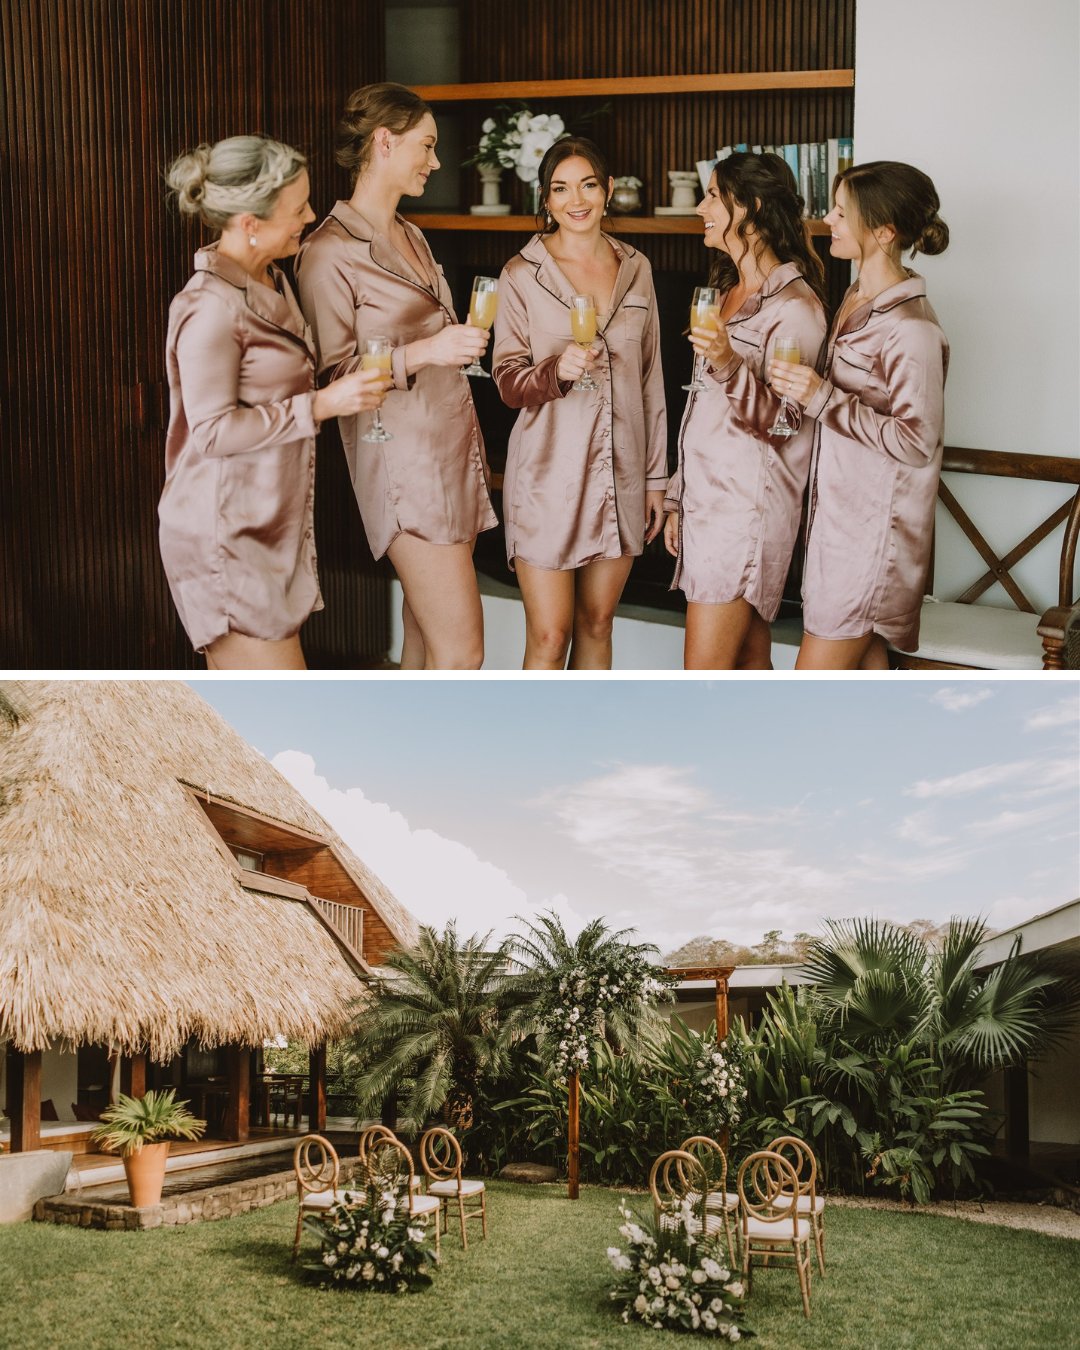 bride with bridesmaids in rose colored silk pajama dresses; ceremony setup in courtyard